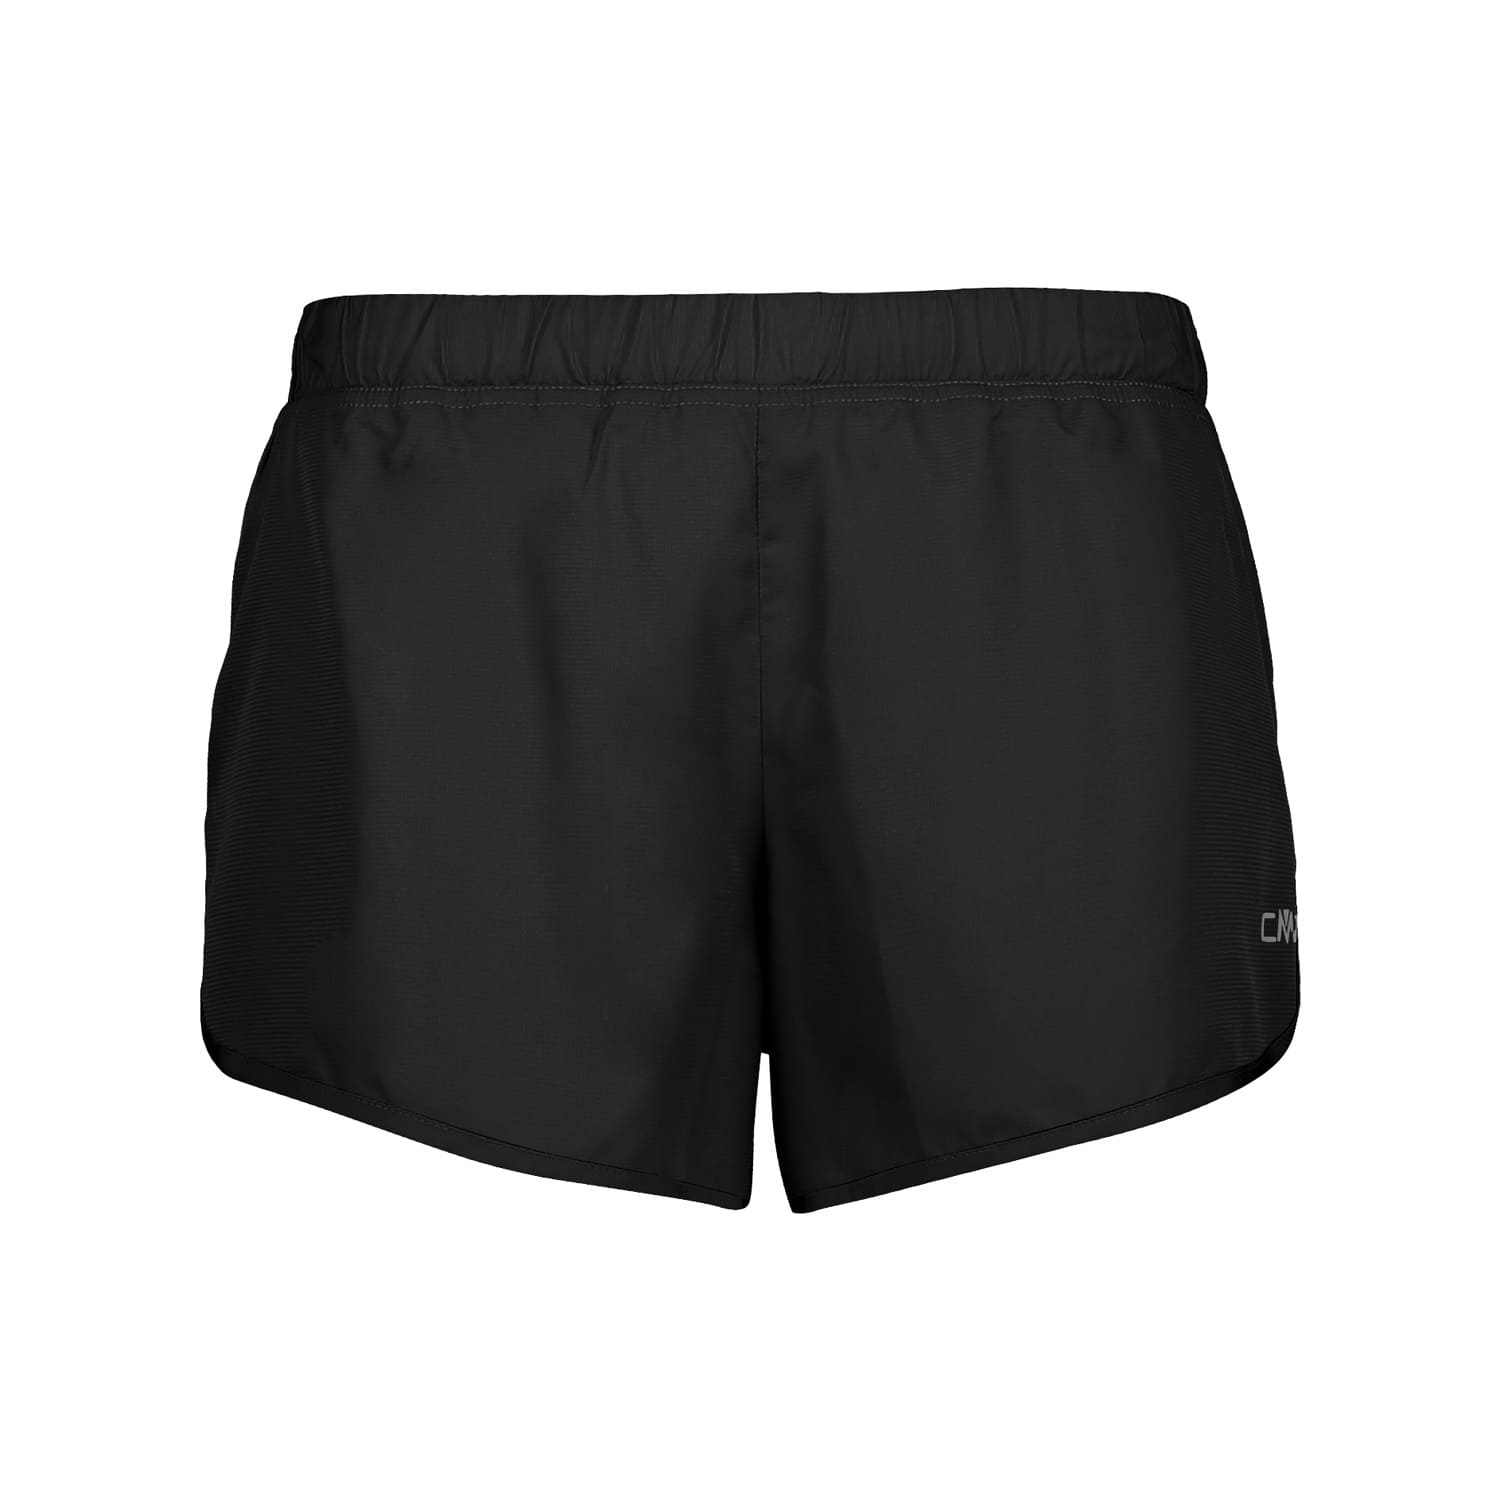 CMP WOMAN SHORTS WITH INNER MESH S NERO - 44/38